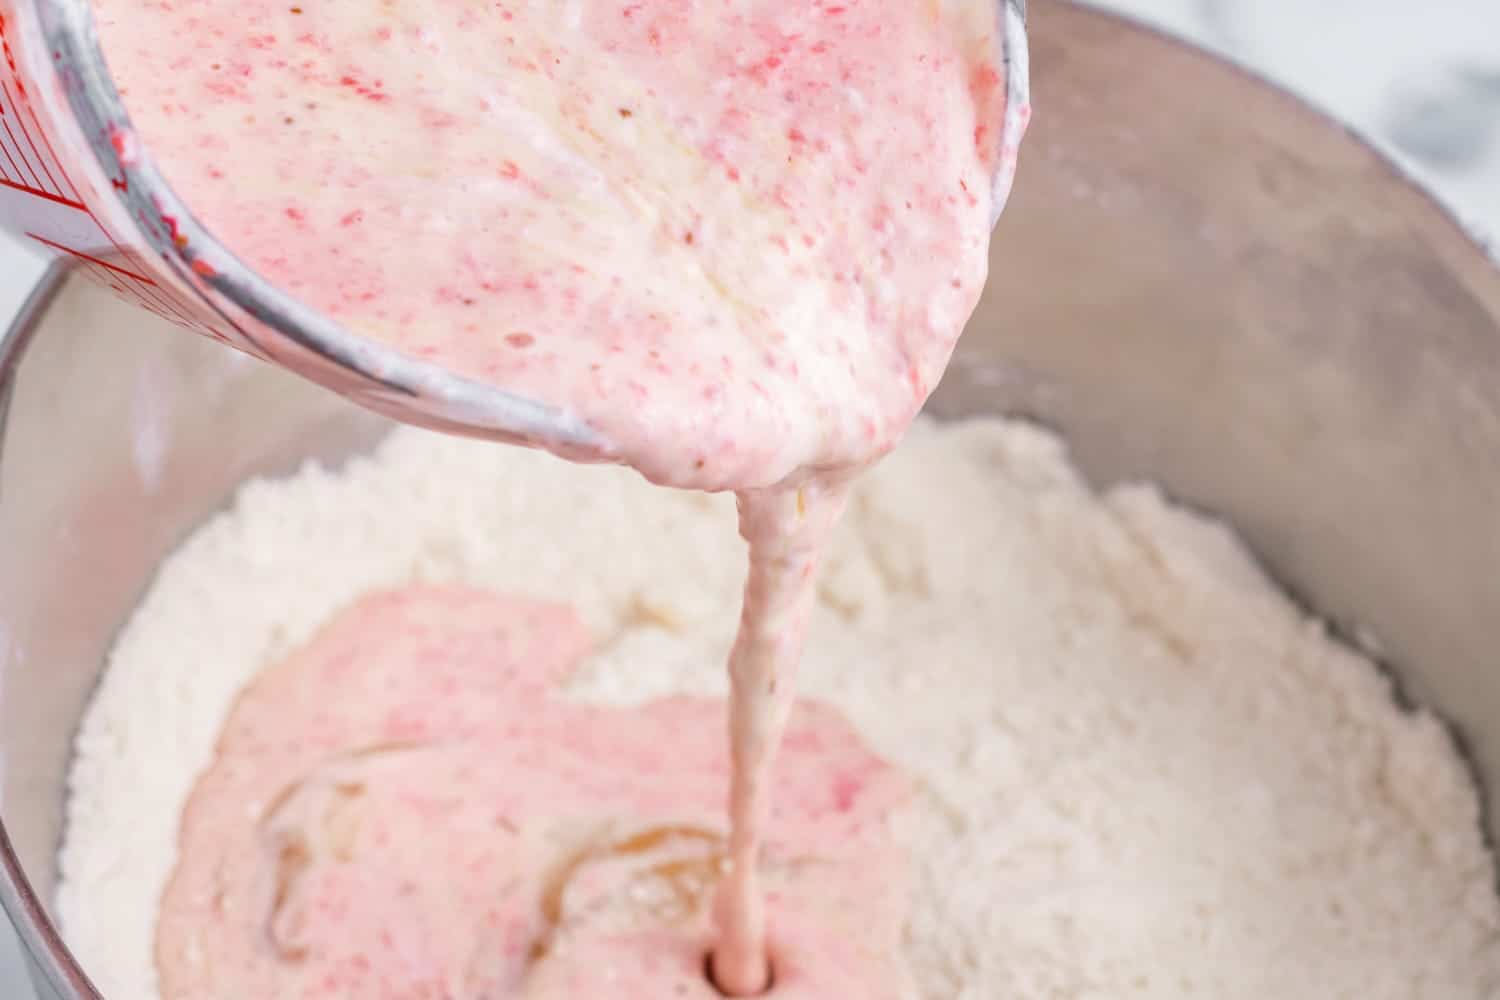 strawberry mixture added to flour to make cake batter.